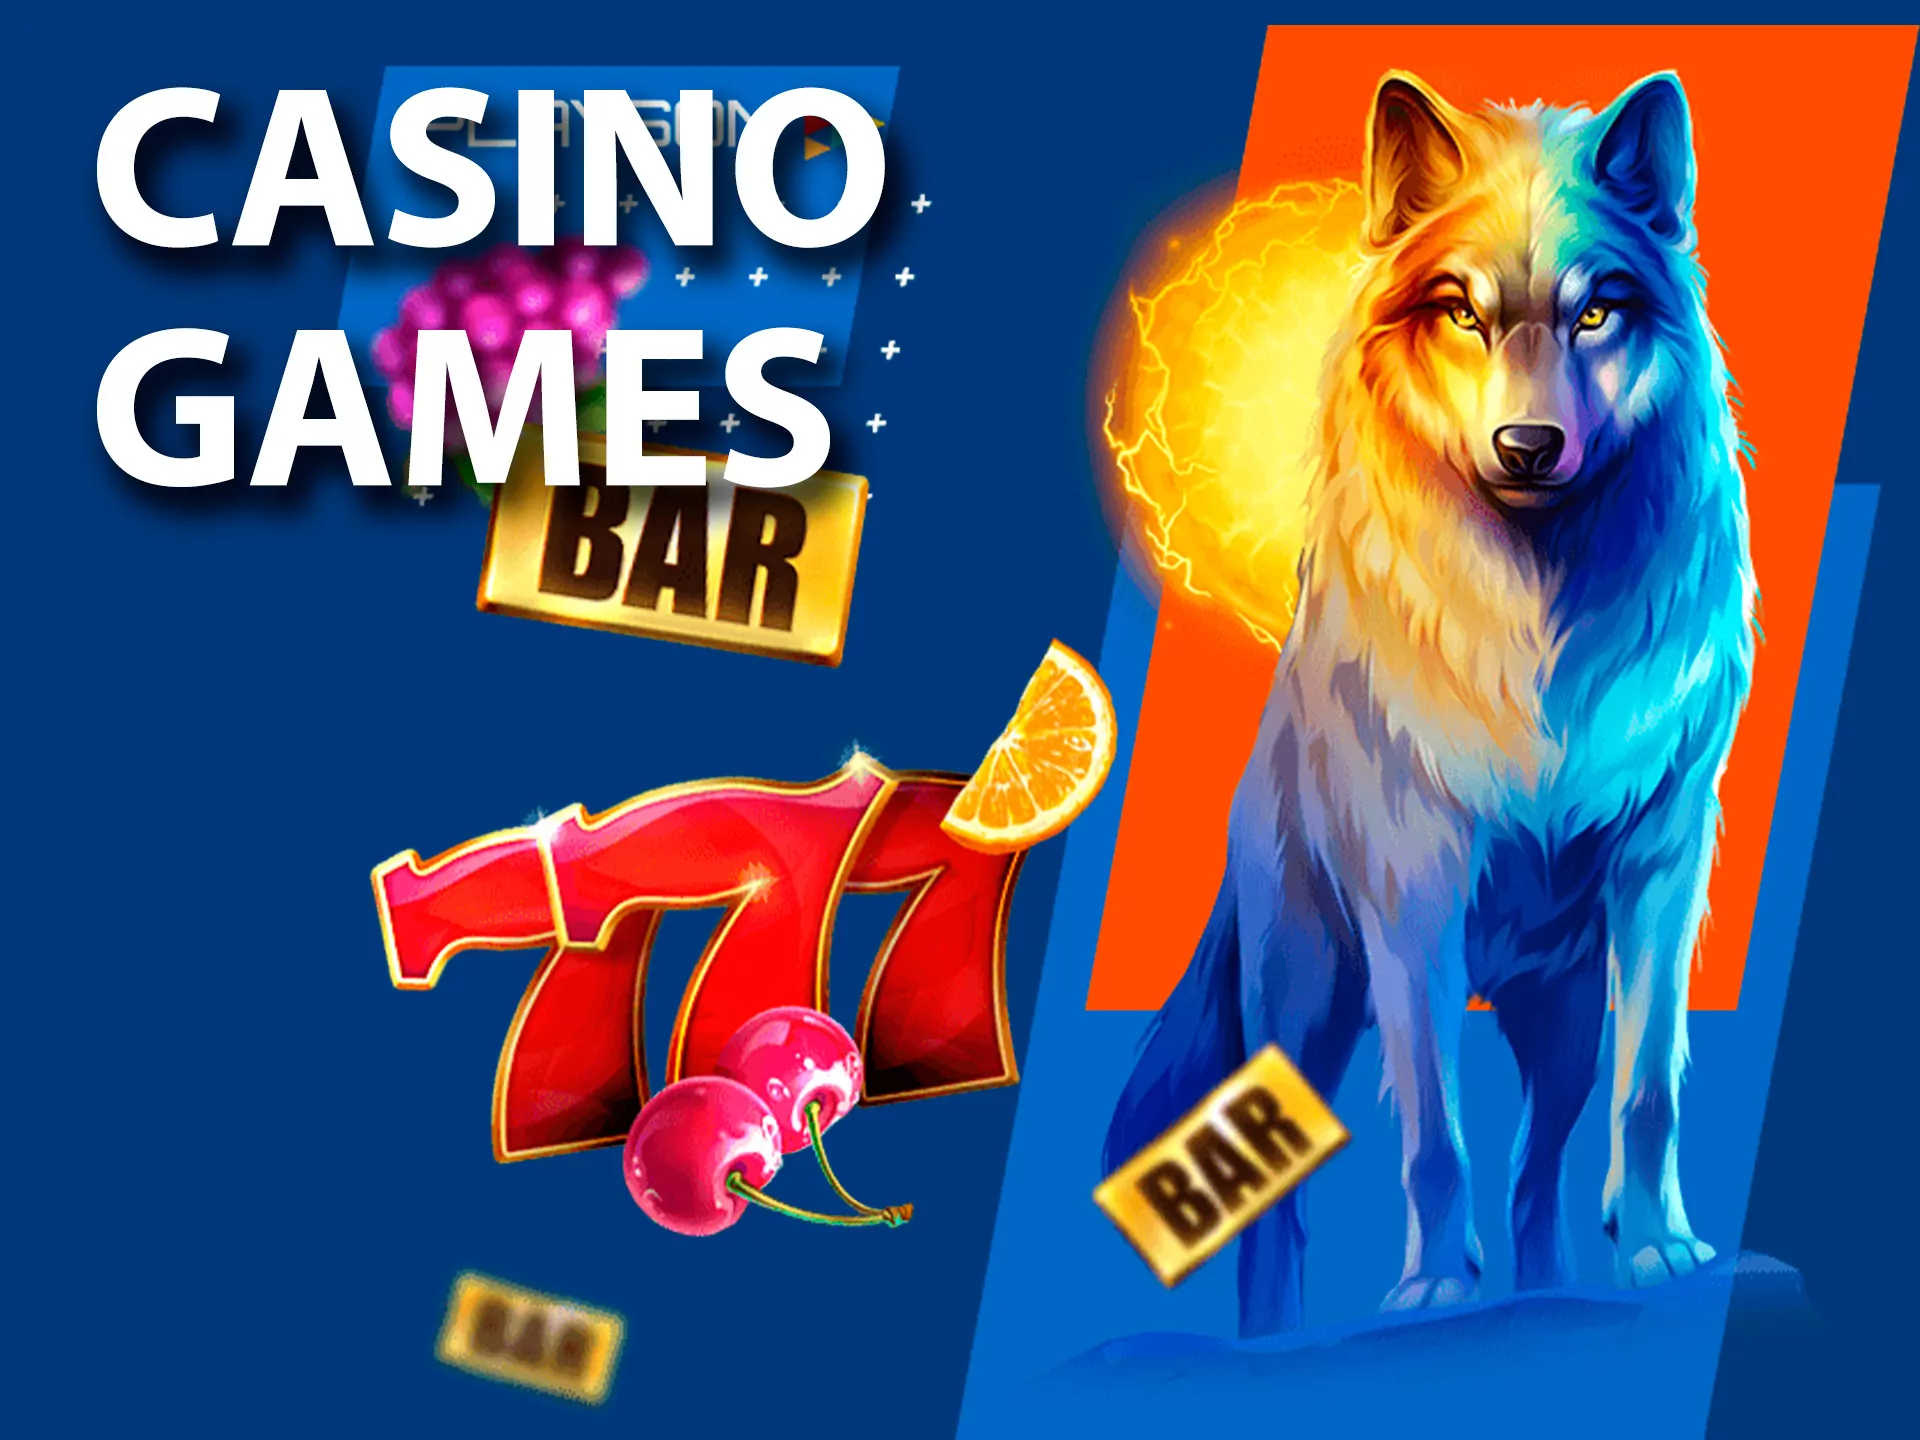 Choose your favorite casino games and place bet on whichever outcome.